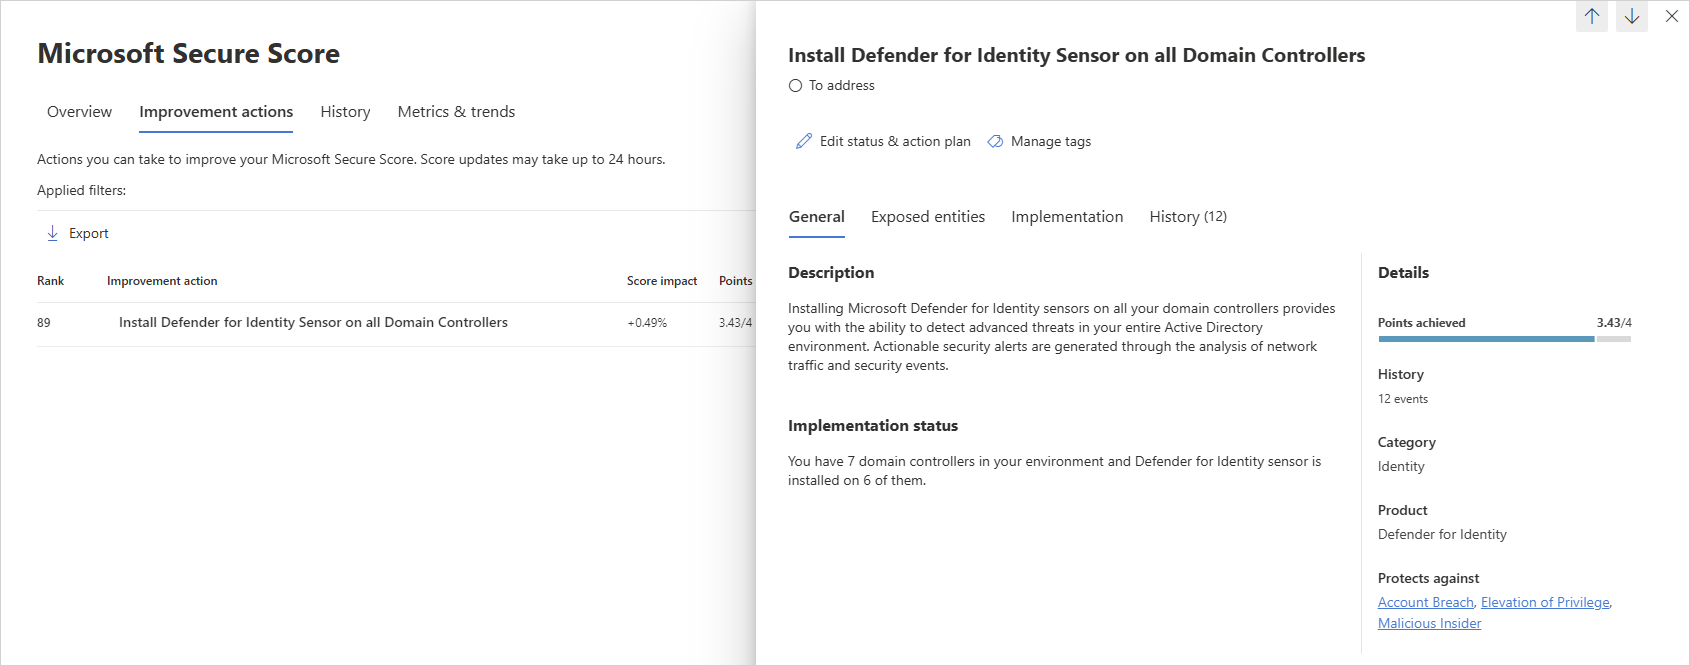 Install Defender for Identity Sensor on all Domain Controllers.